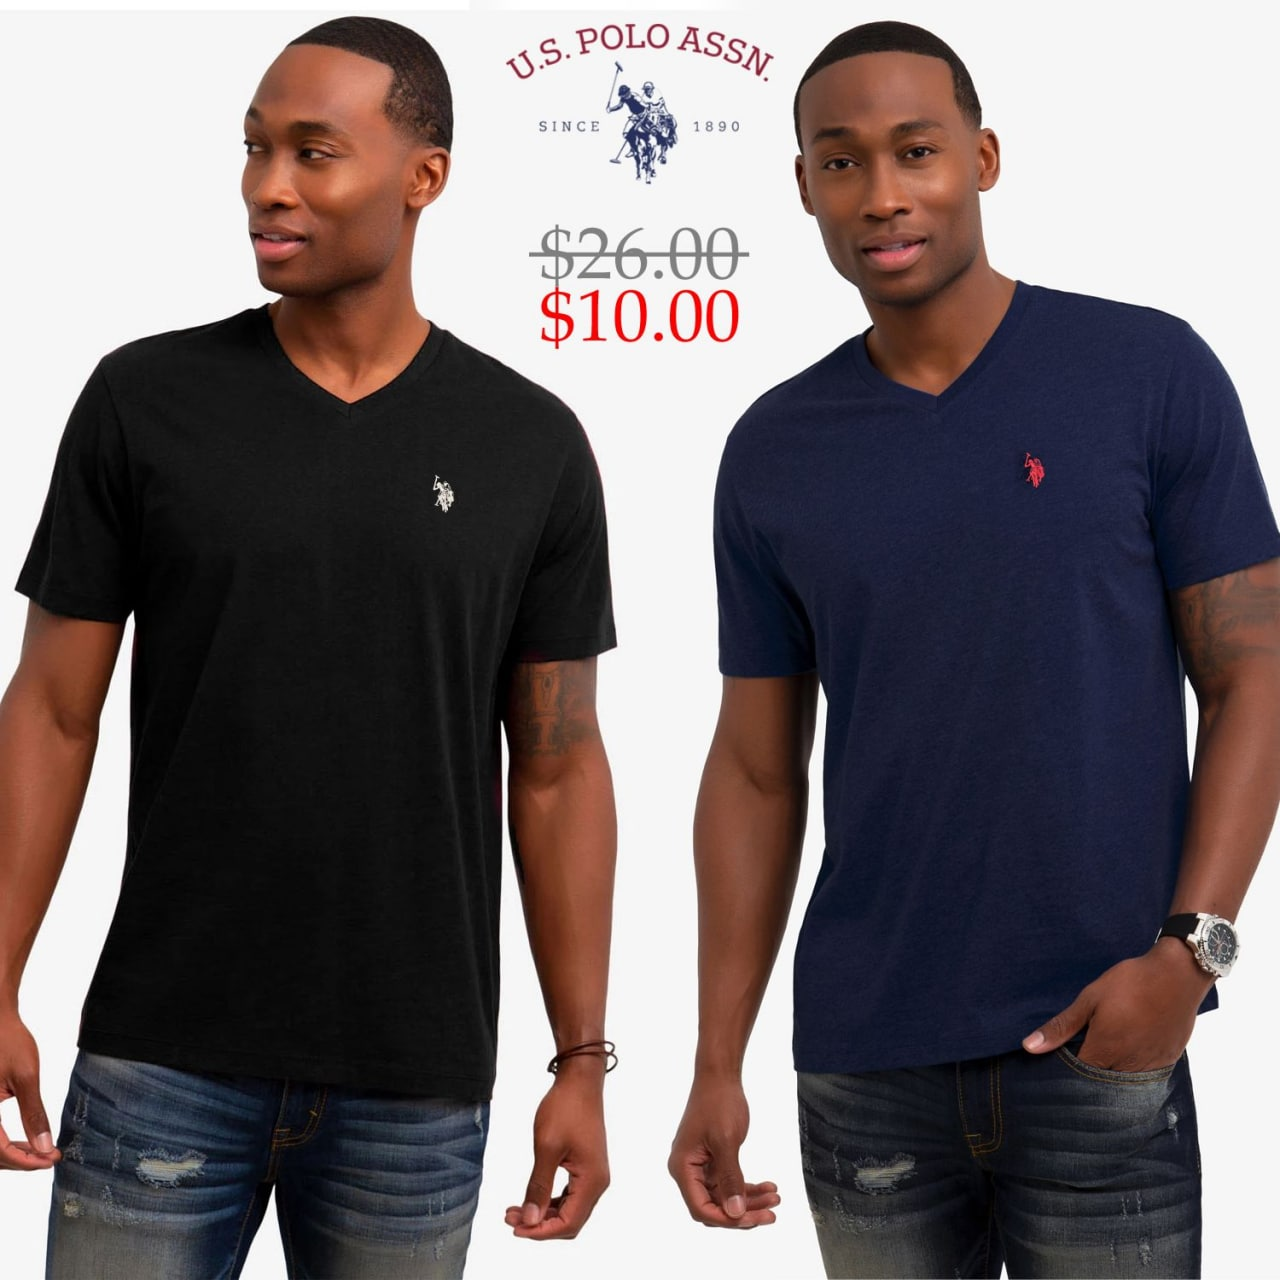 Explore Our Selection of US Polo T-Shirts and Look Amazing!